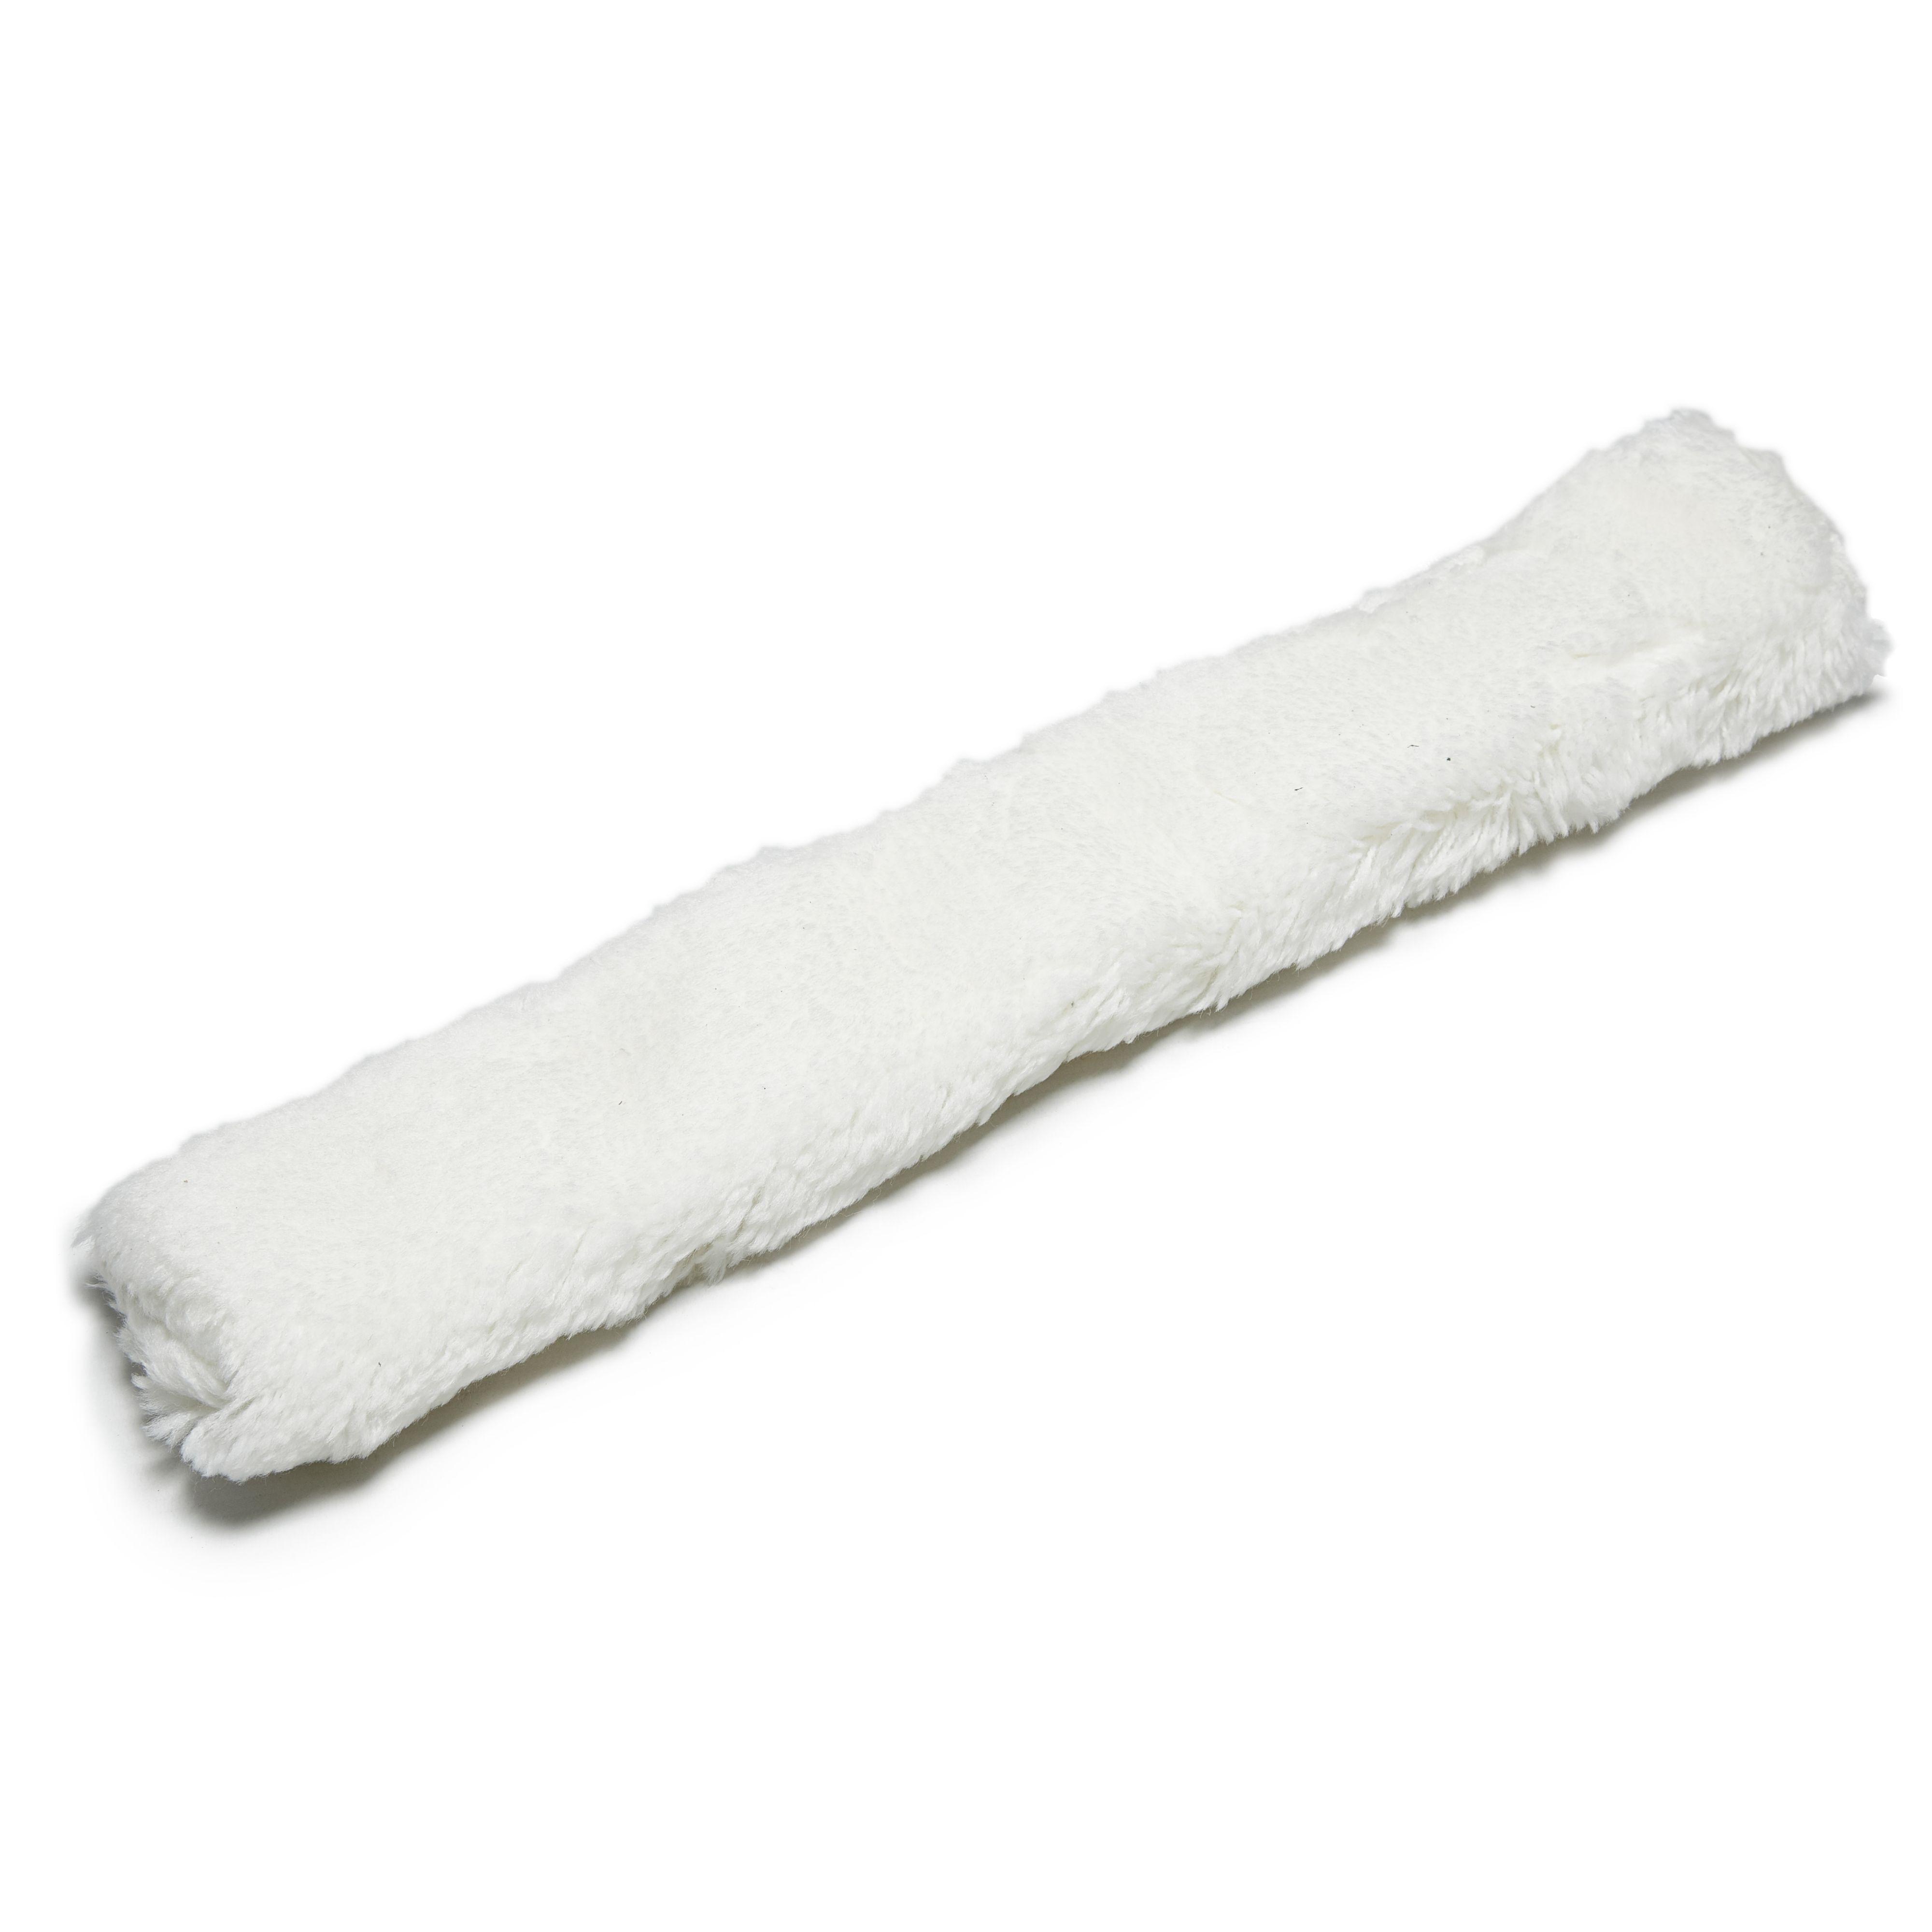 Window scrubber replacement, (W)350mm